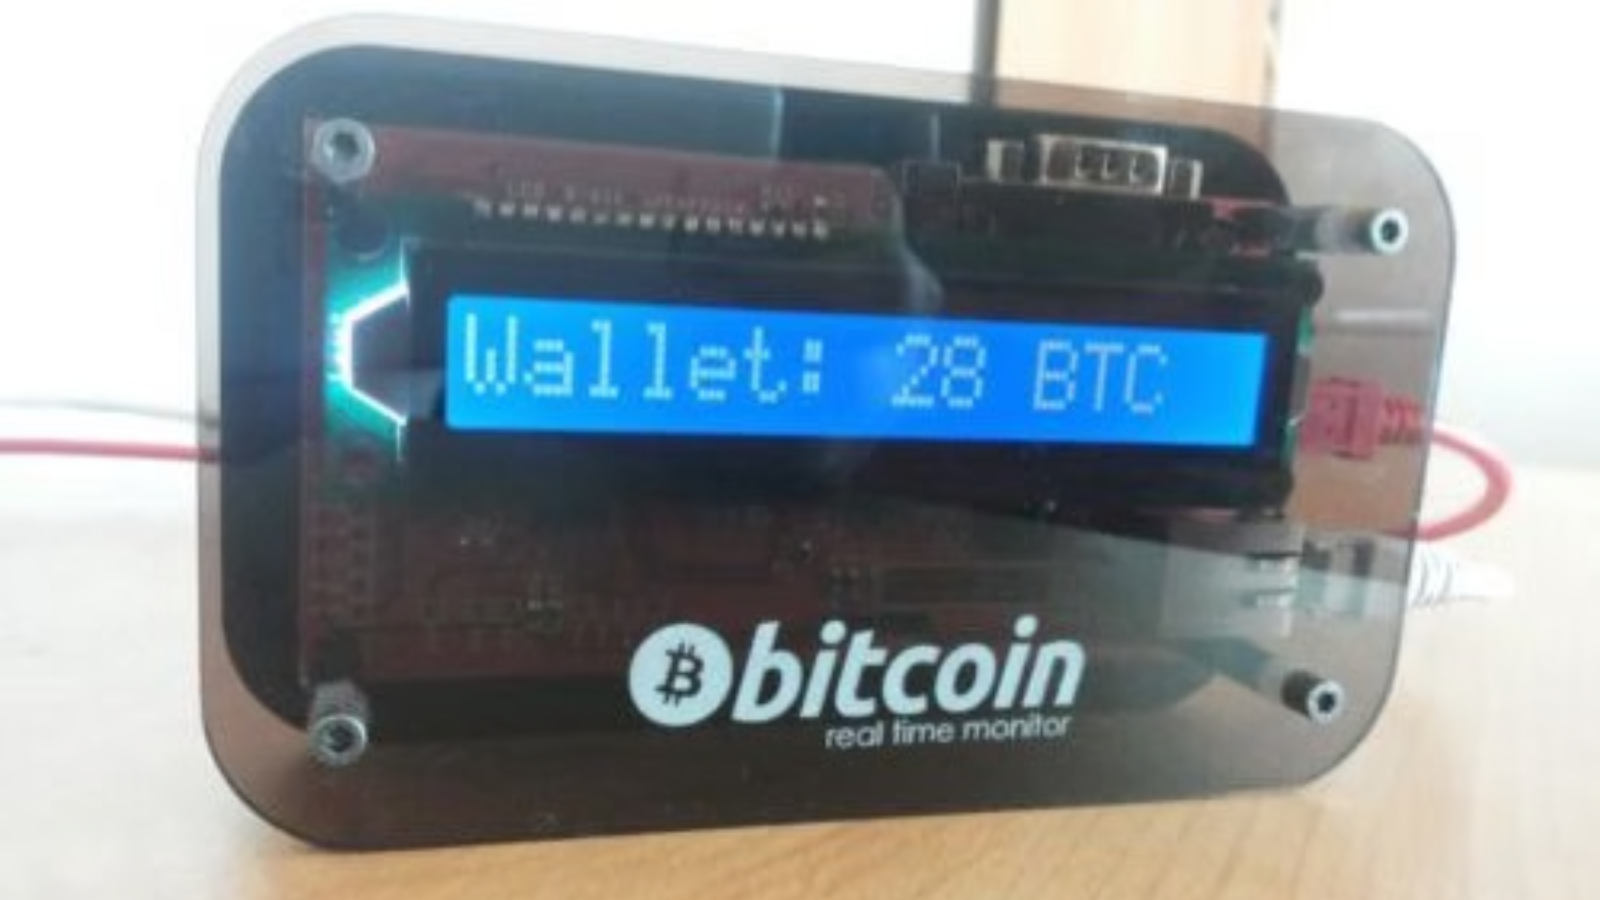 A photo of the Bitcoin event: The first physical bitcoin price and wallet monitor was built